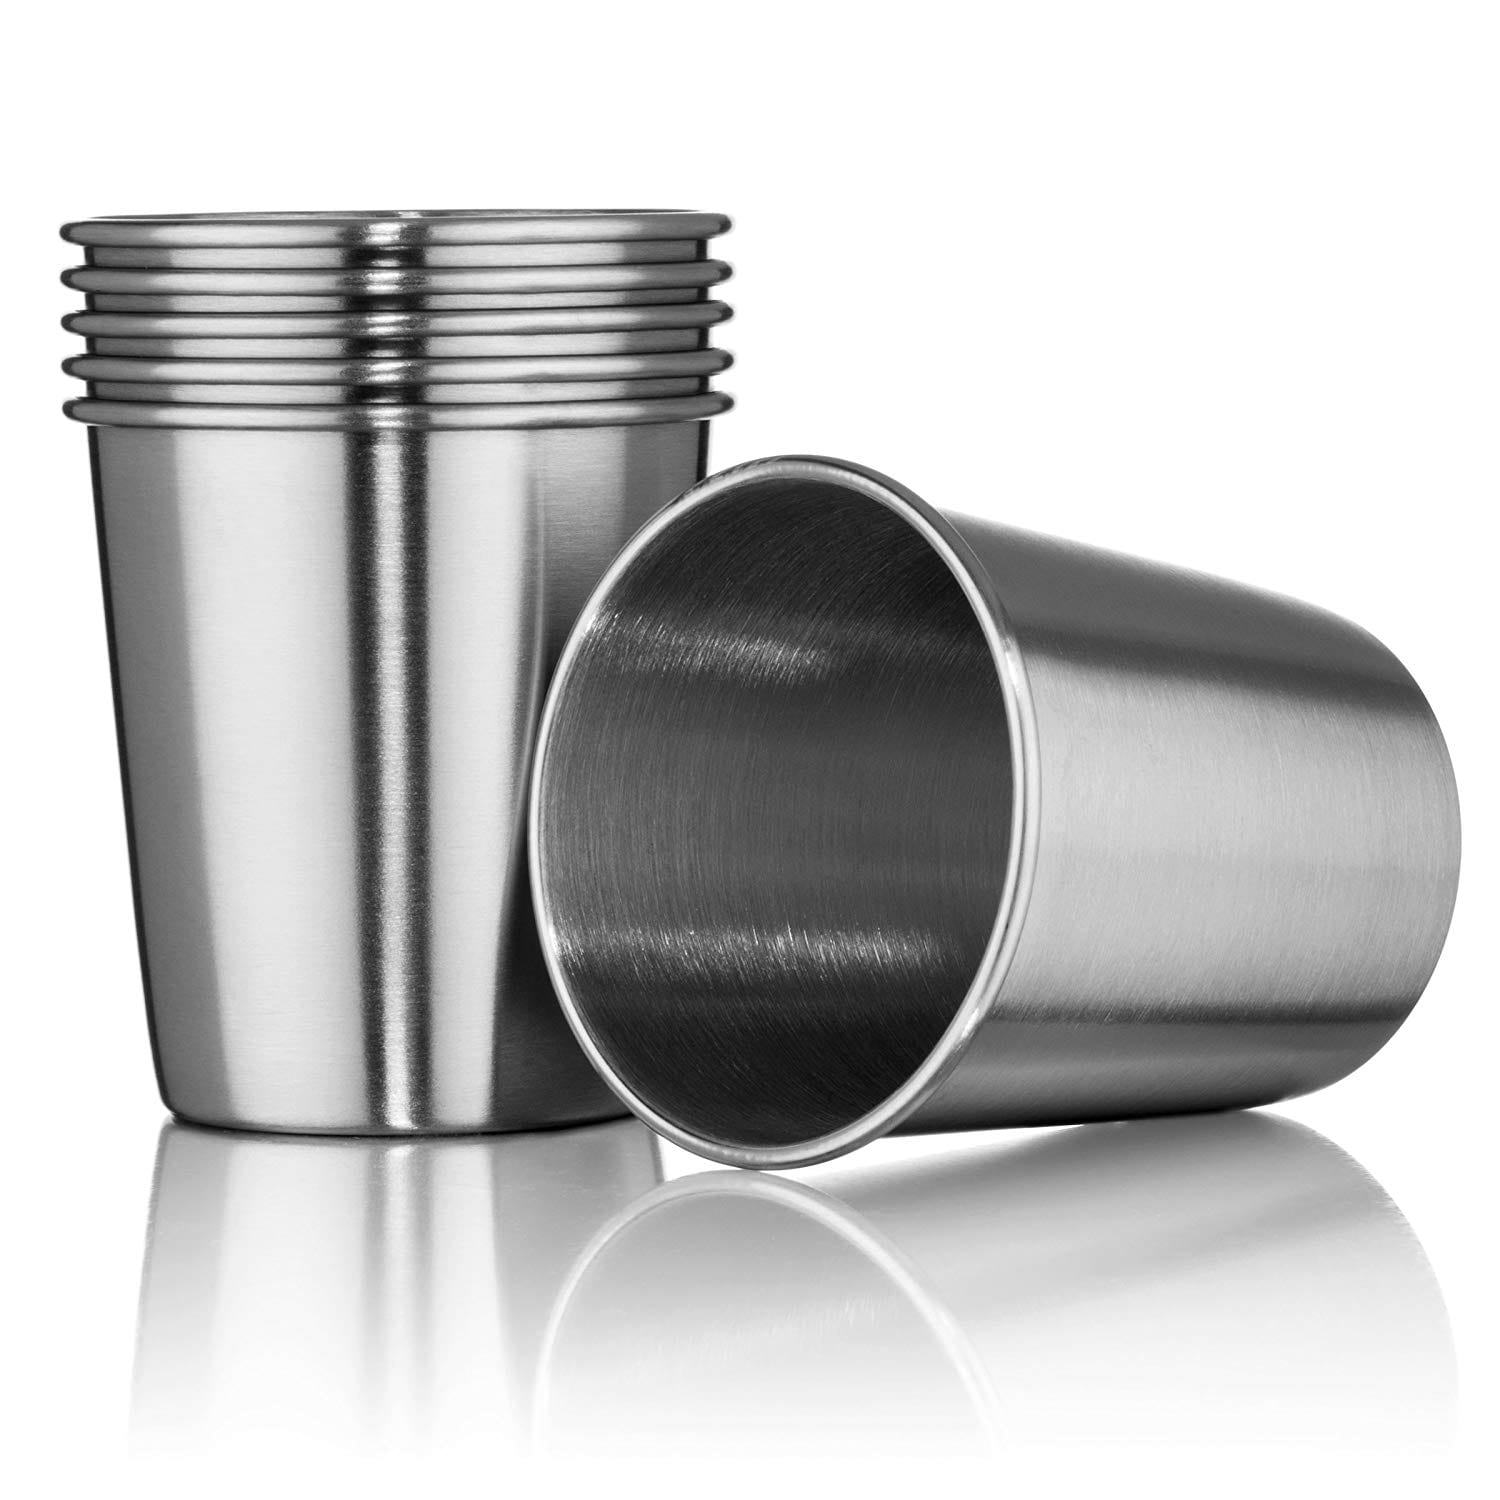 best vinyl for stainless steel cups